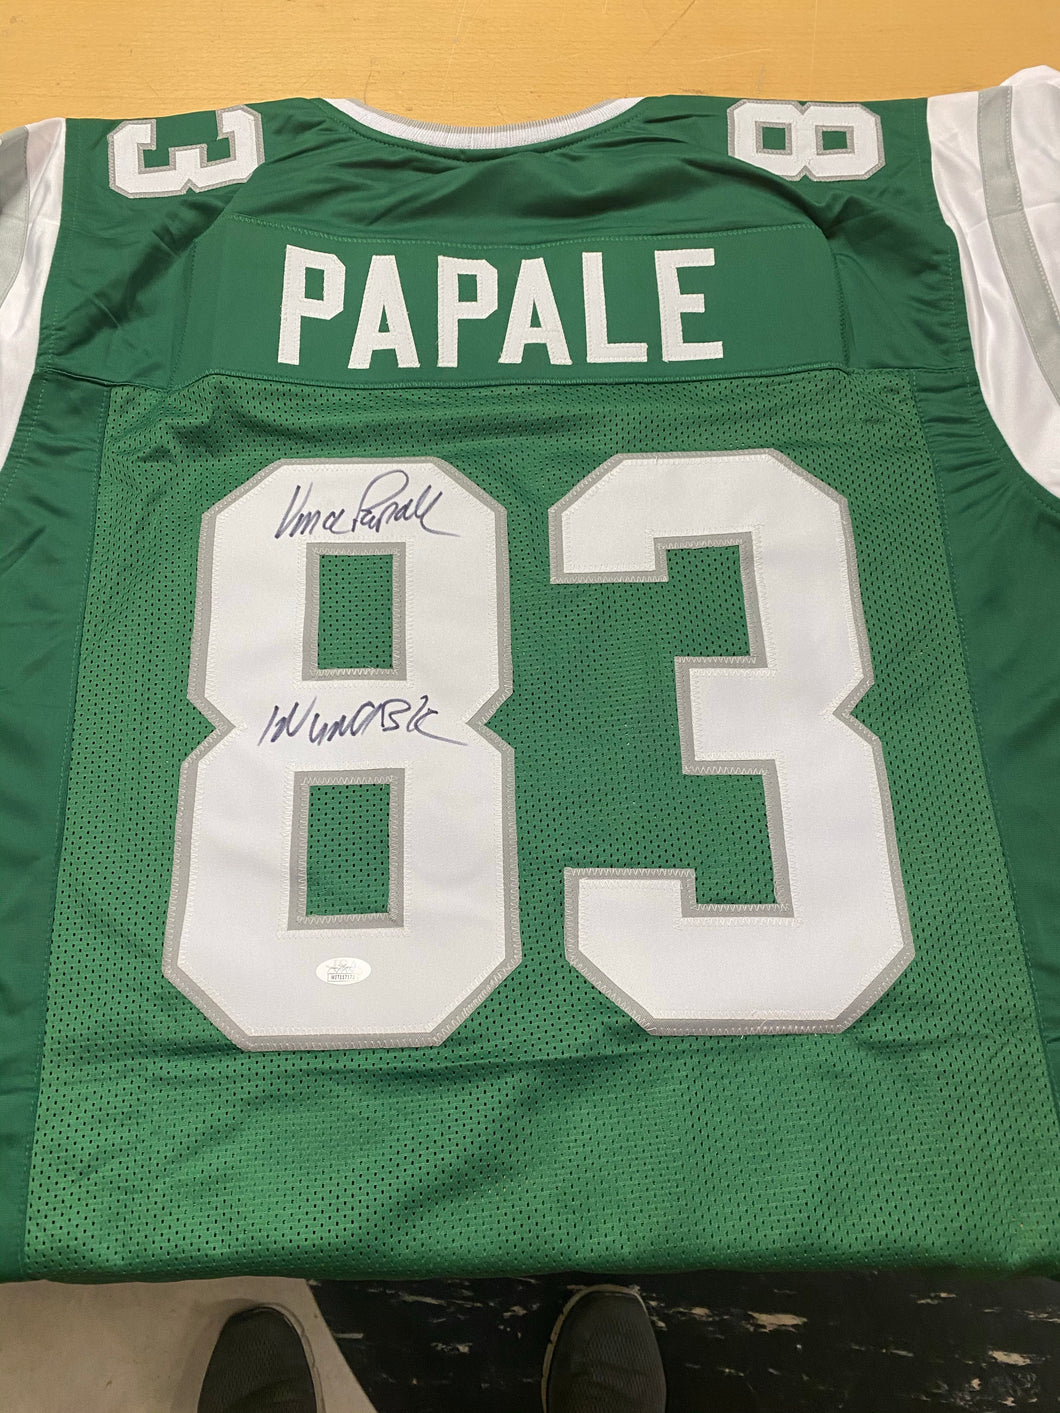 Vince Papale Signed Jersey with Invincible inscription